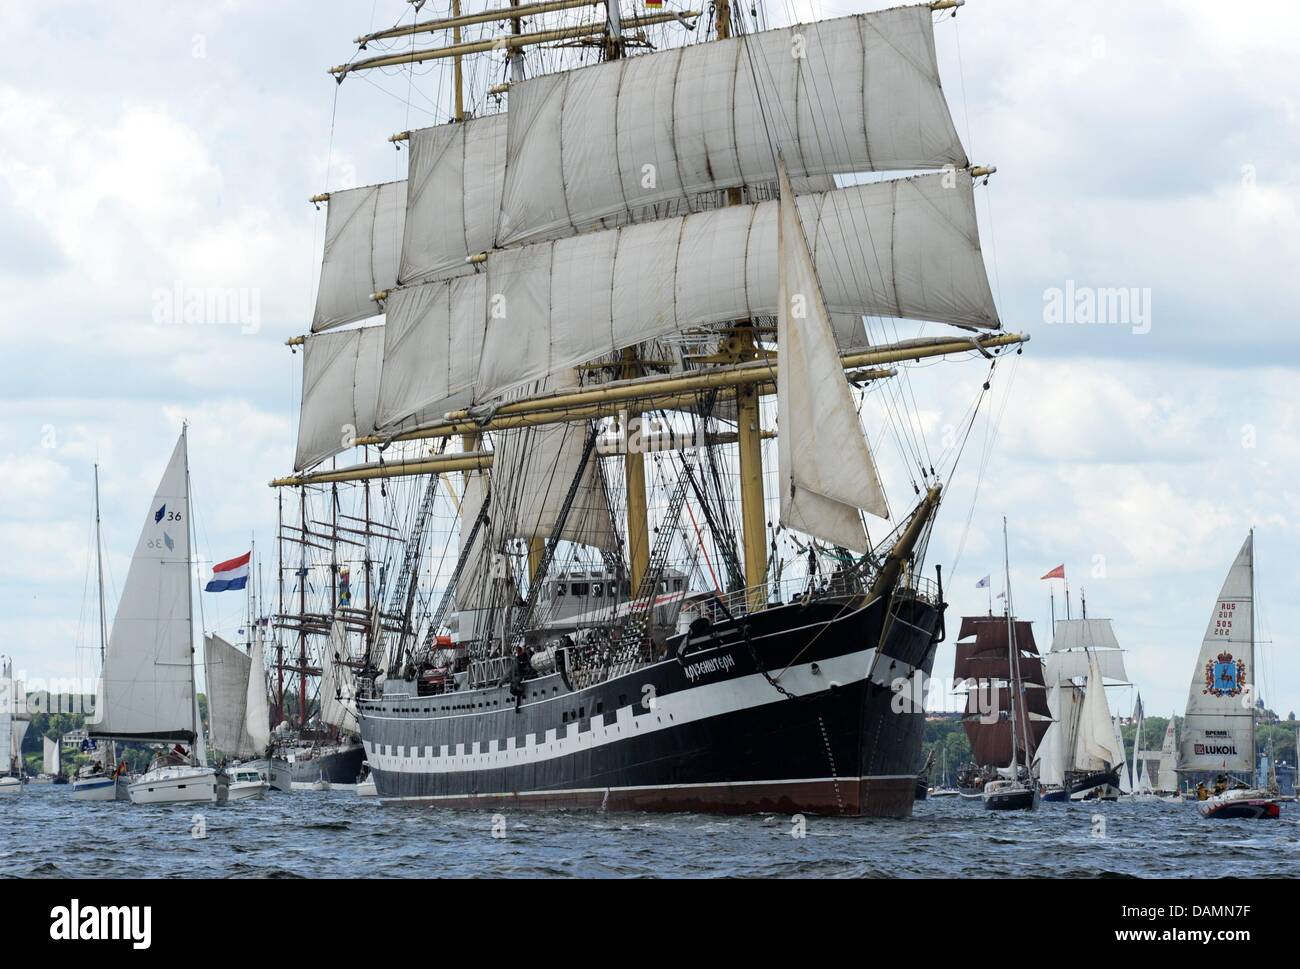 The Russian four-masted barque 'Kruzenshtern' heads into the Baltic Sea during the traditional windjammer parade of the Kiel Week in Kiel, Germany, 25 June 2011. Approximately 120 tall and traditional ships plus tenders participate in the event. Tens of thousands of people watch the parade on land and sea. Photo: Carsten Rehder Stock Photo